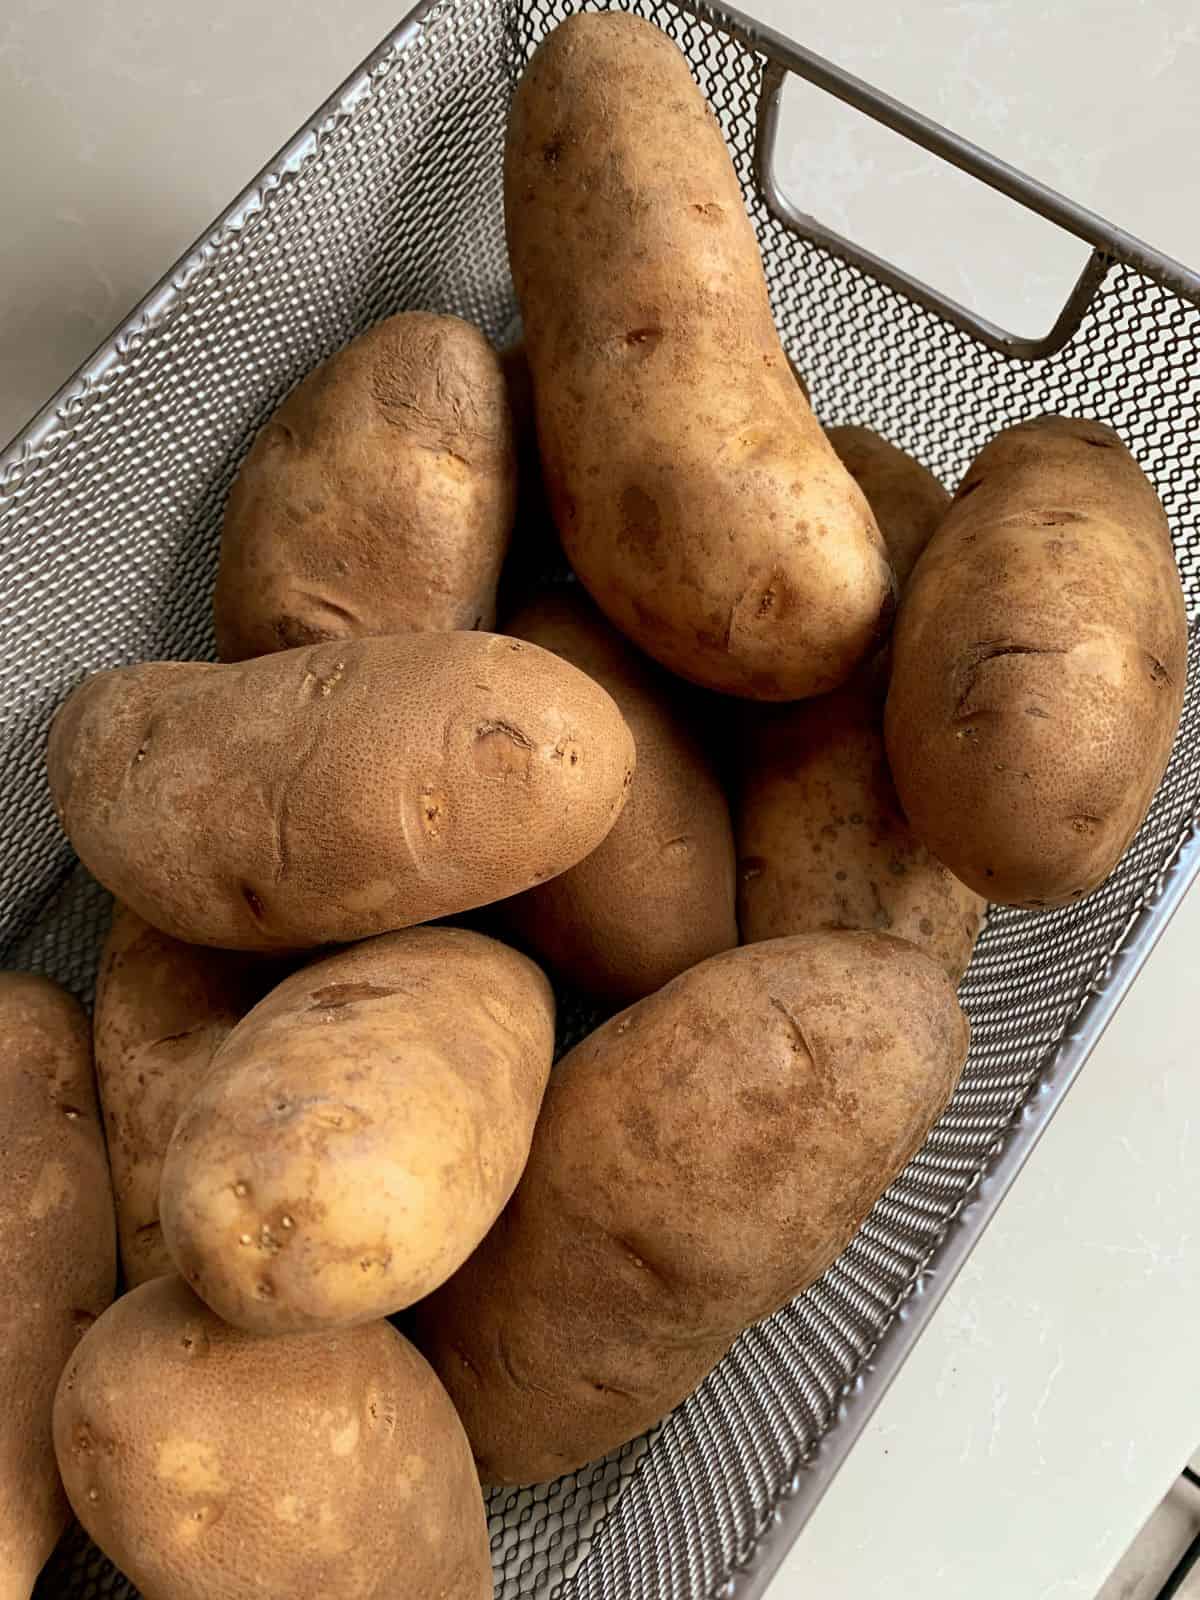 uncooked potatoes in a basket.